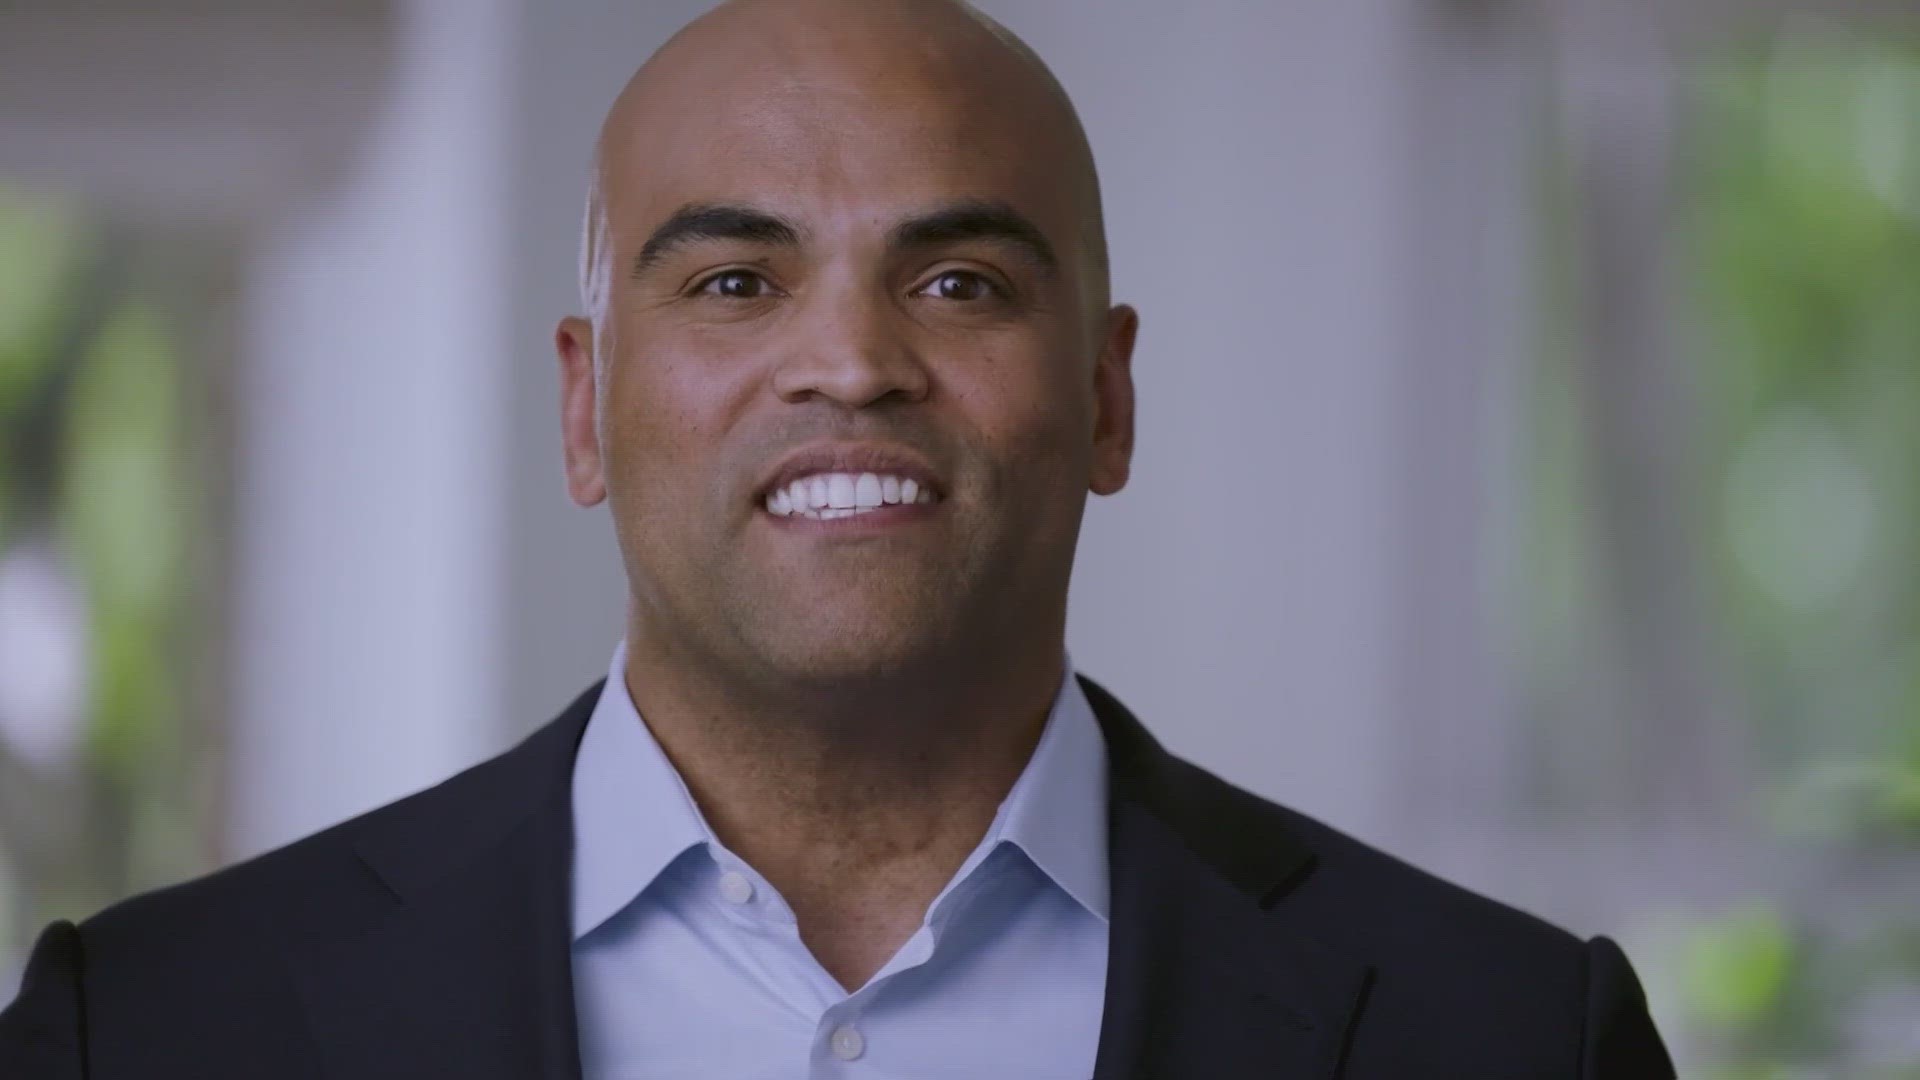 Colin Allred won Texas on Super Tuesday, ABC News reported.